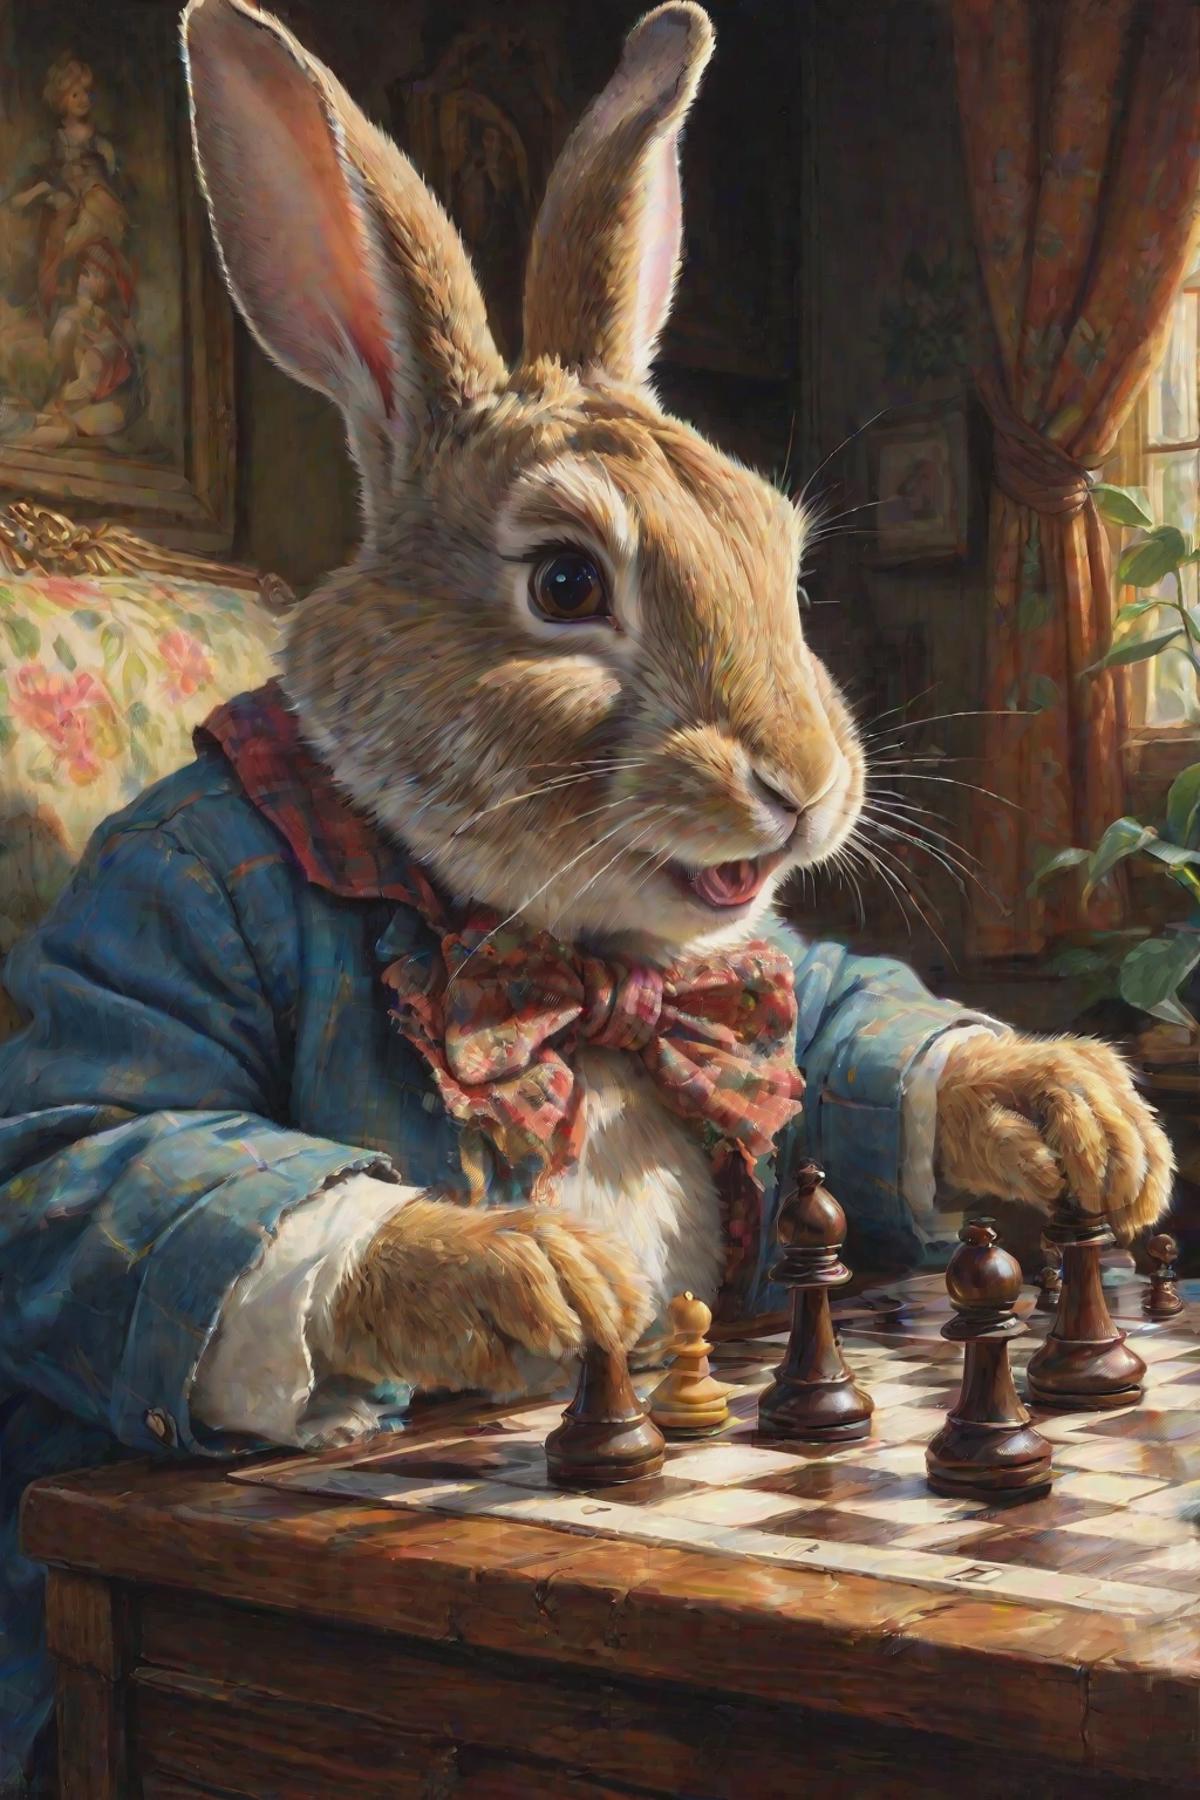 A painting of a bunny rabbit playing chess.